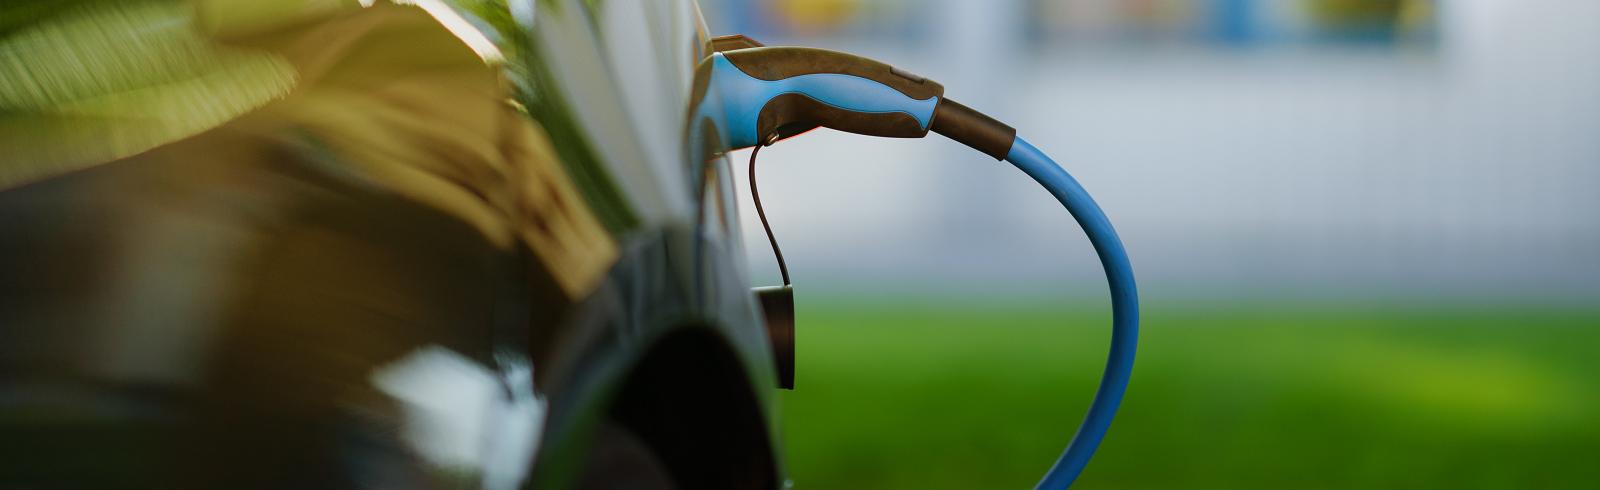 Your next car should an Electric Vehicle